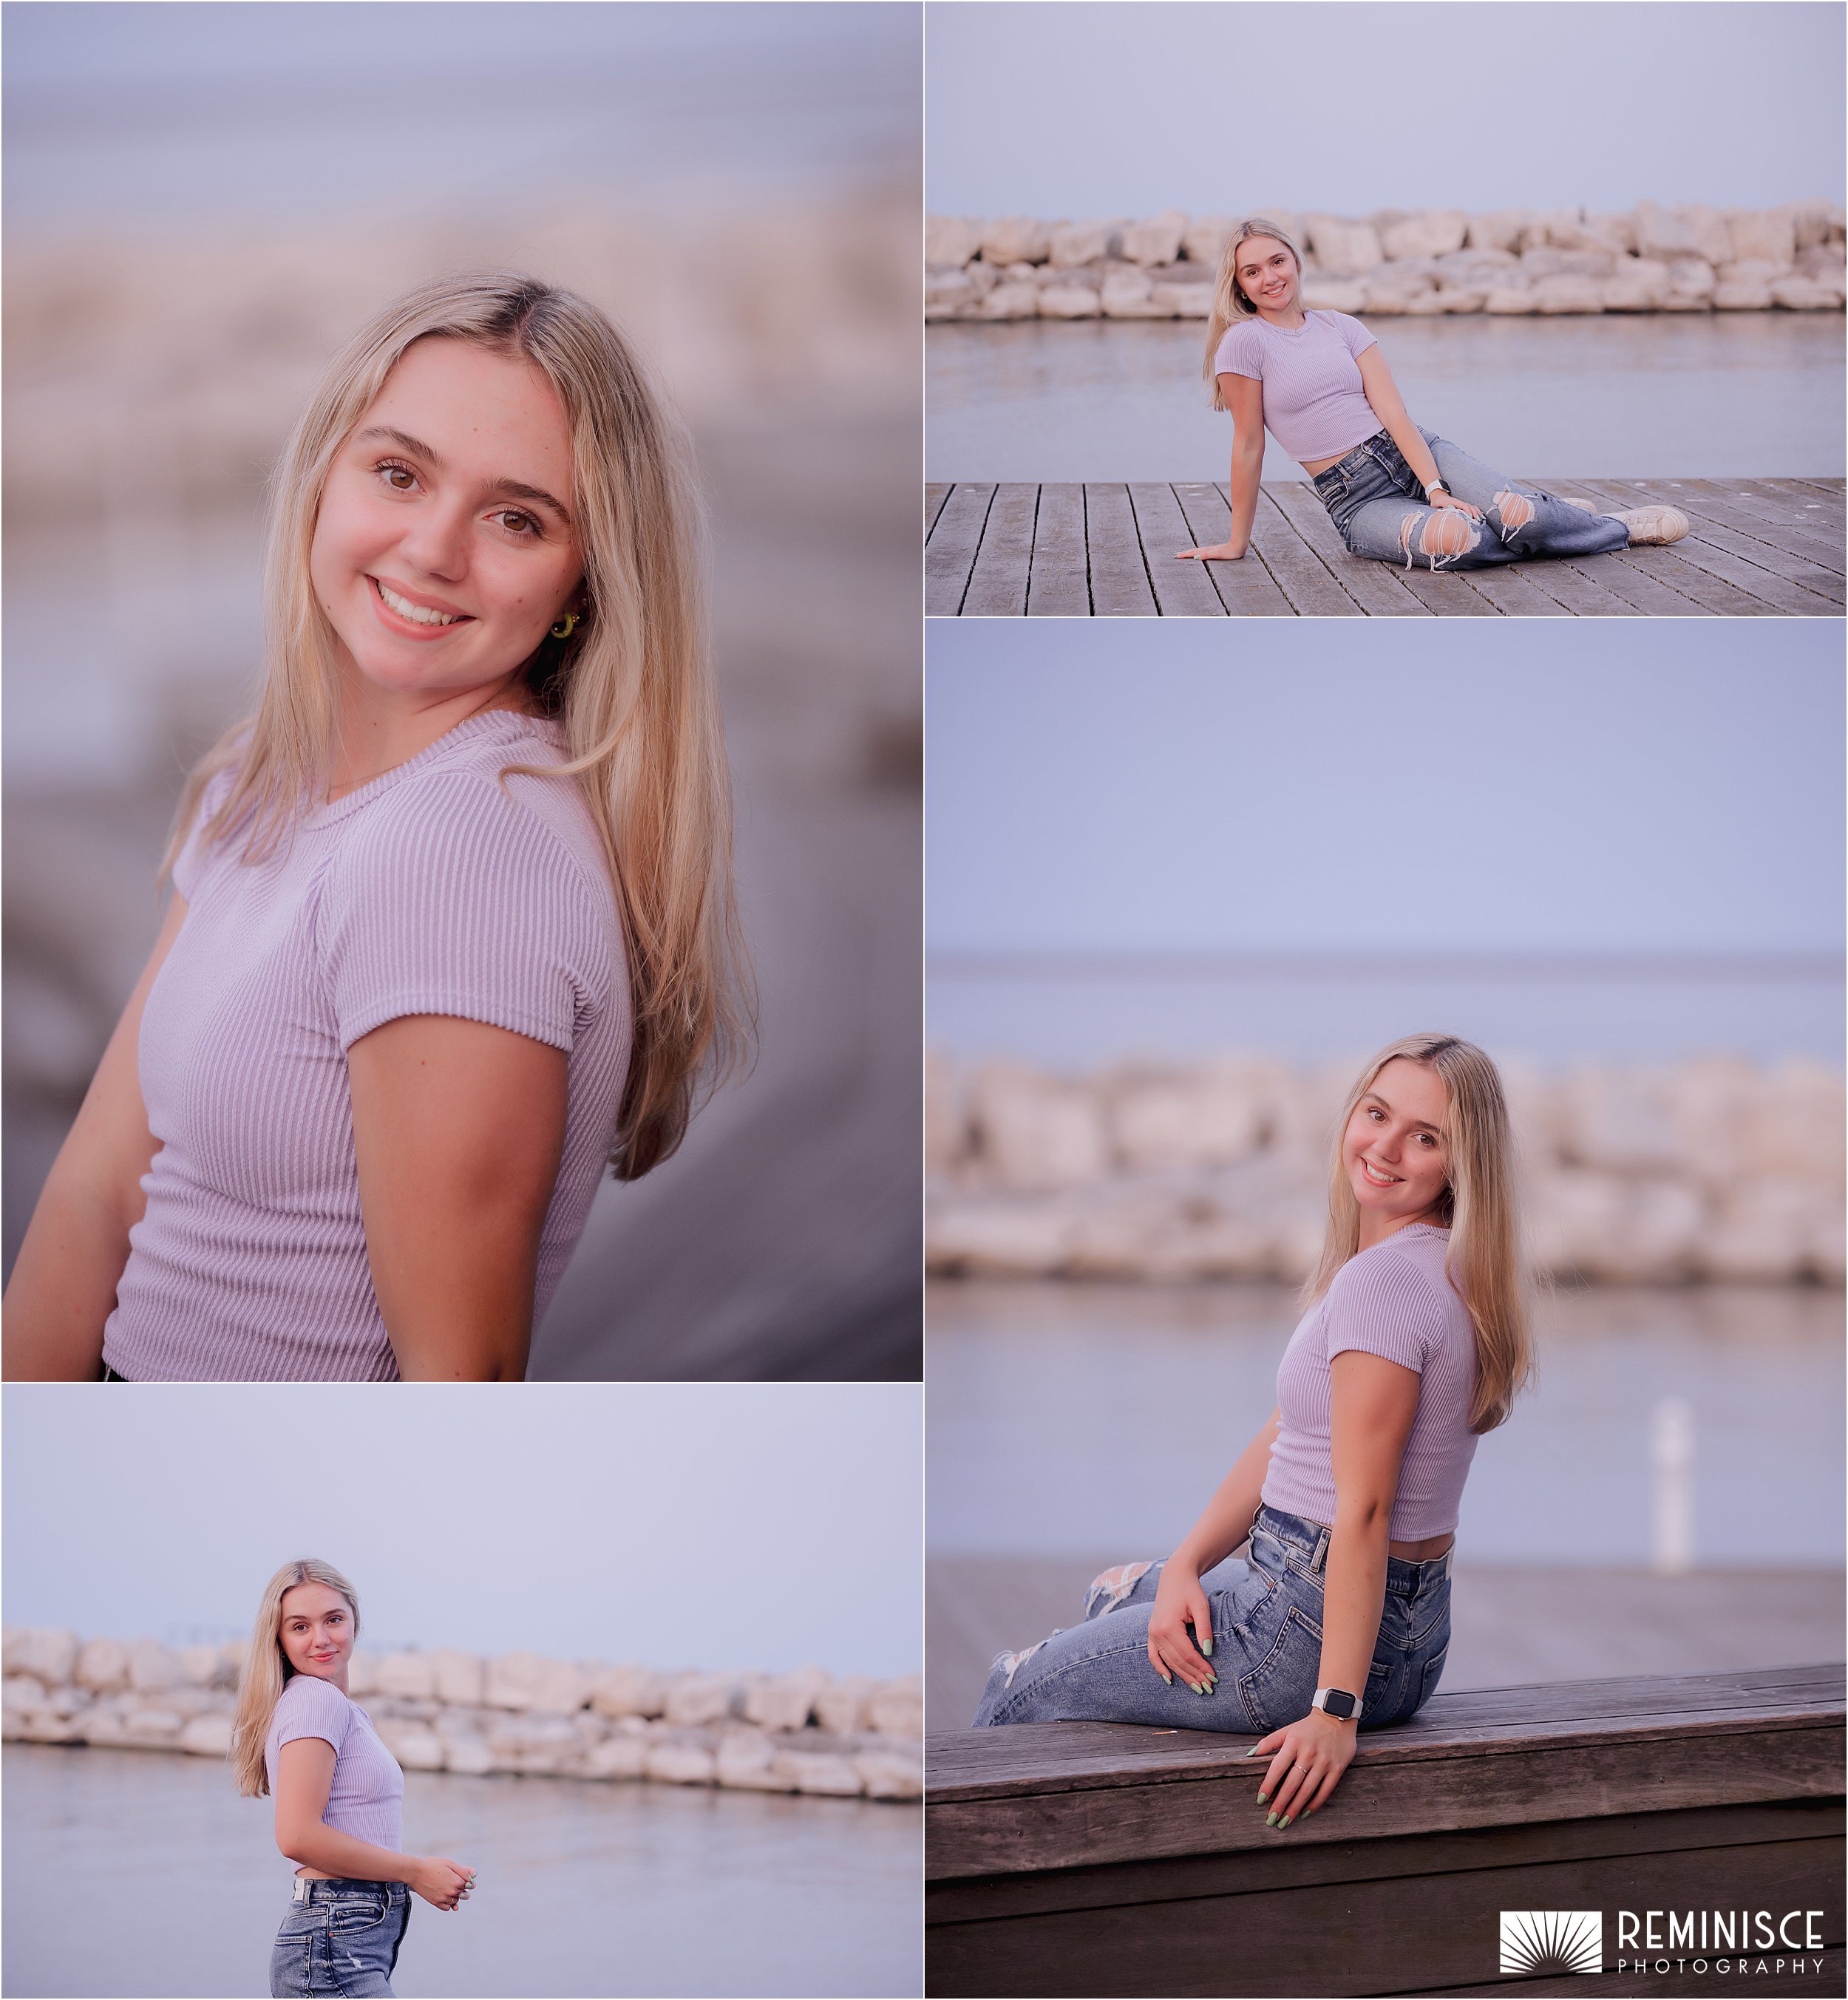 Best Milwaukee, Madison, and Chicago senior portrait photographer. Artistic and candid high school yearbook photography featuring graduation, downtown, nature, and the lakefront in photoshoot sessions without drape. Boy, girl, and non binary senior photos.